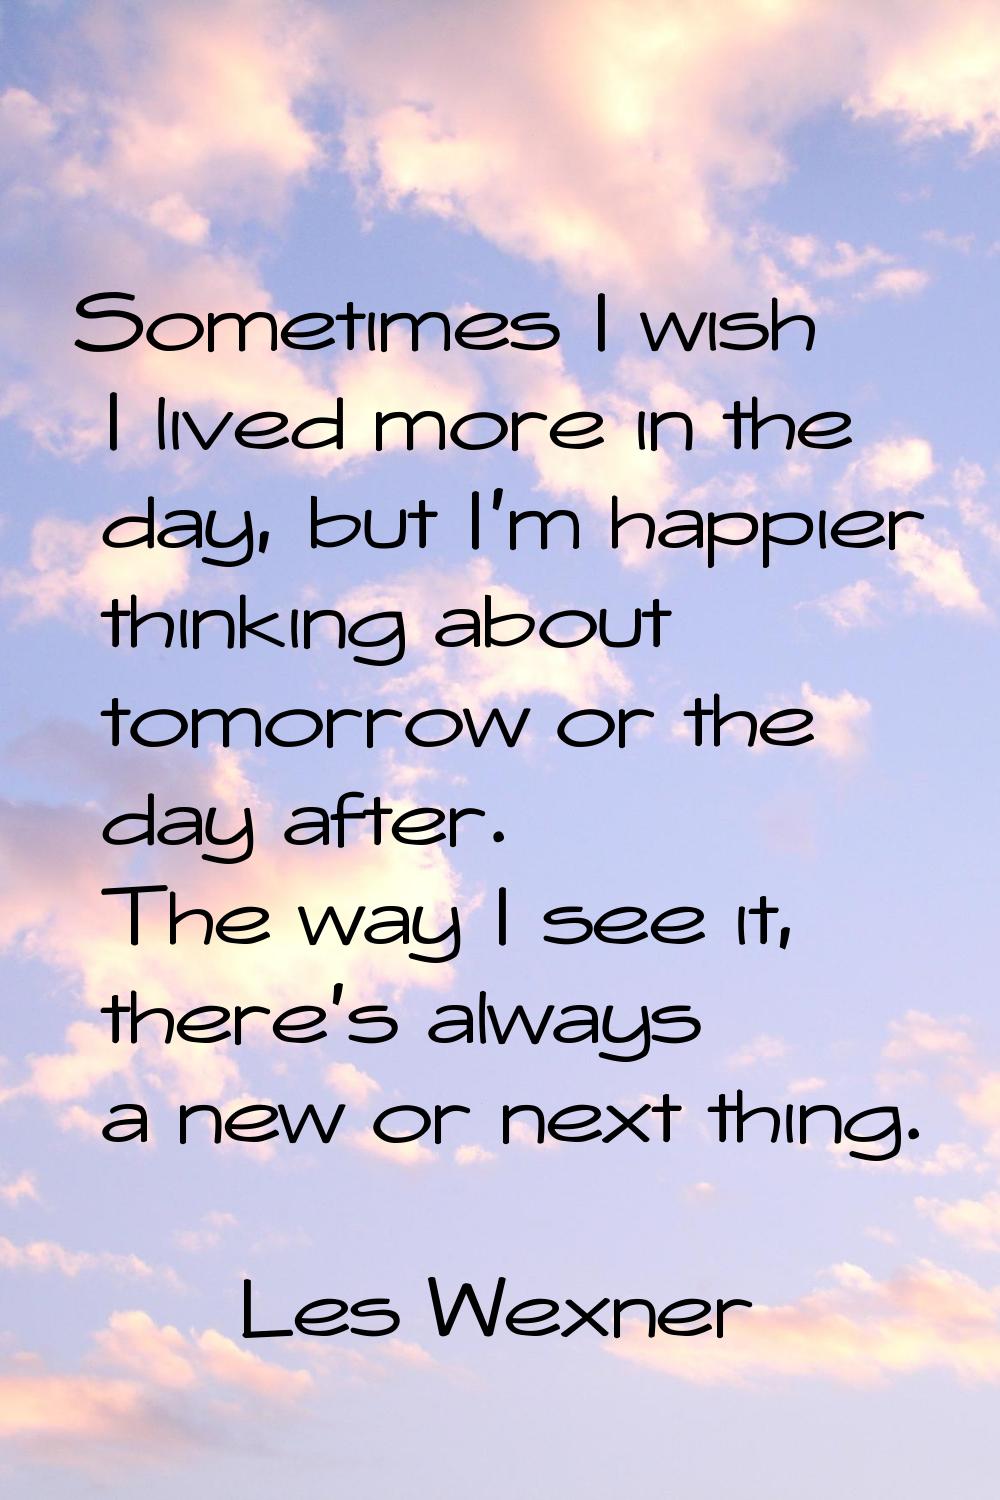 Sometimes I wish I lived more in the day, but I'm happier thinking about tomorrow or the day after.